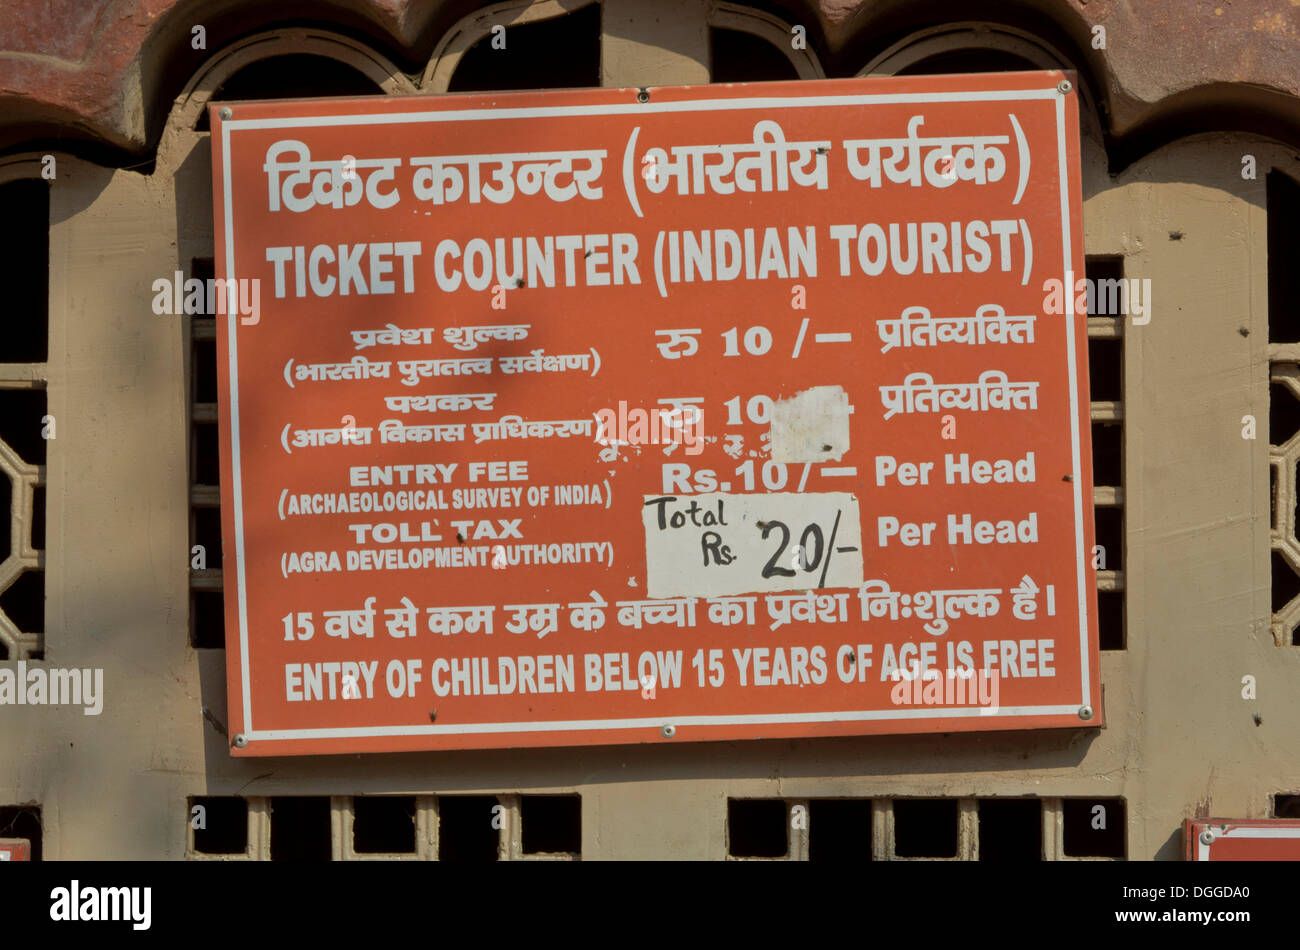 Price list with different entry fees for Indians and foreigners at the entrance of Taj Mahal, Agra, India, Asia Stock Photo